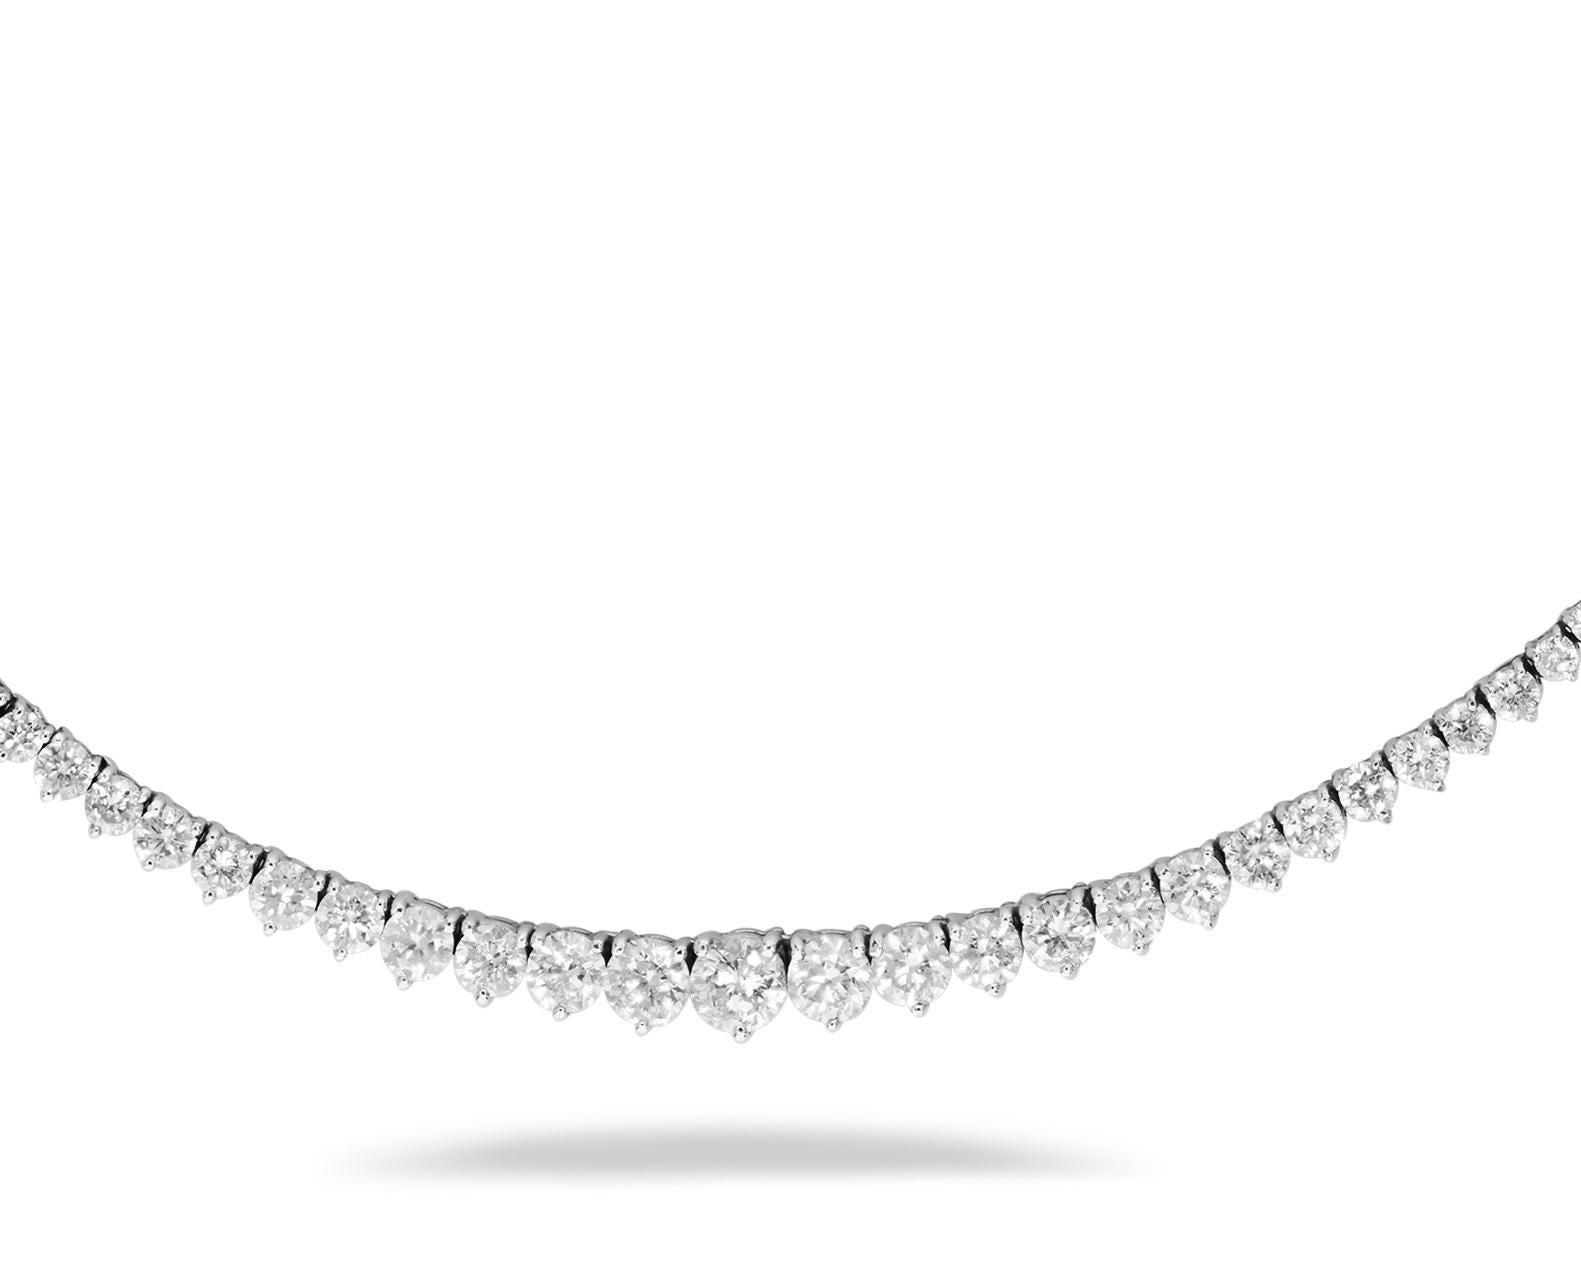 5.34 Carat Graduated Round Diamond Necklace in 14k White Gold ref103 In New Condition For Sale In New York, NY